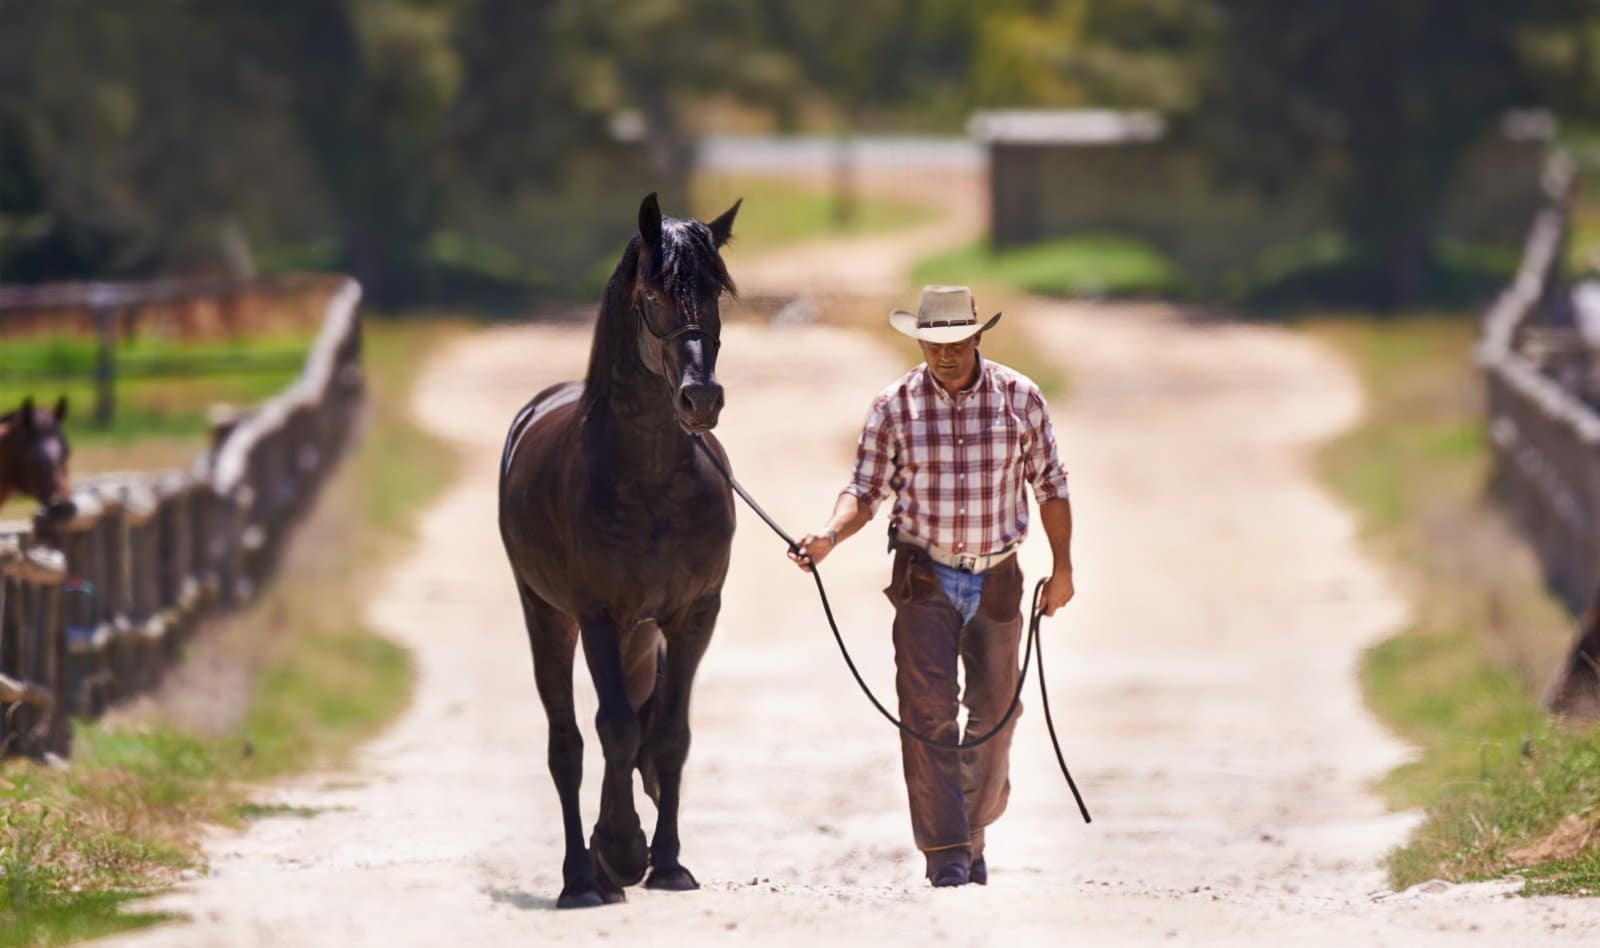 <p class="wp-caption-text">Image Credit: Shutterstock / PeopleImages.com – Yuri A</p>  <p><span>Yes, it’s a thing. It’s where the soul of the cowboy is put into words, proving that tough guys do, in fact, write poetry.</span></p>